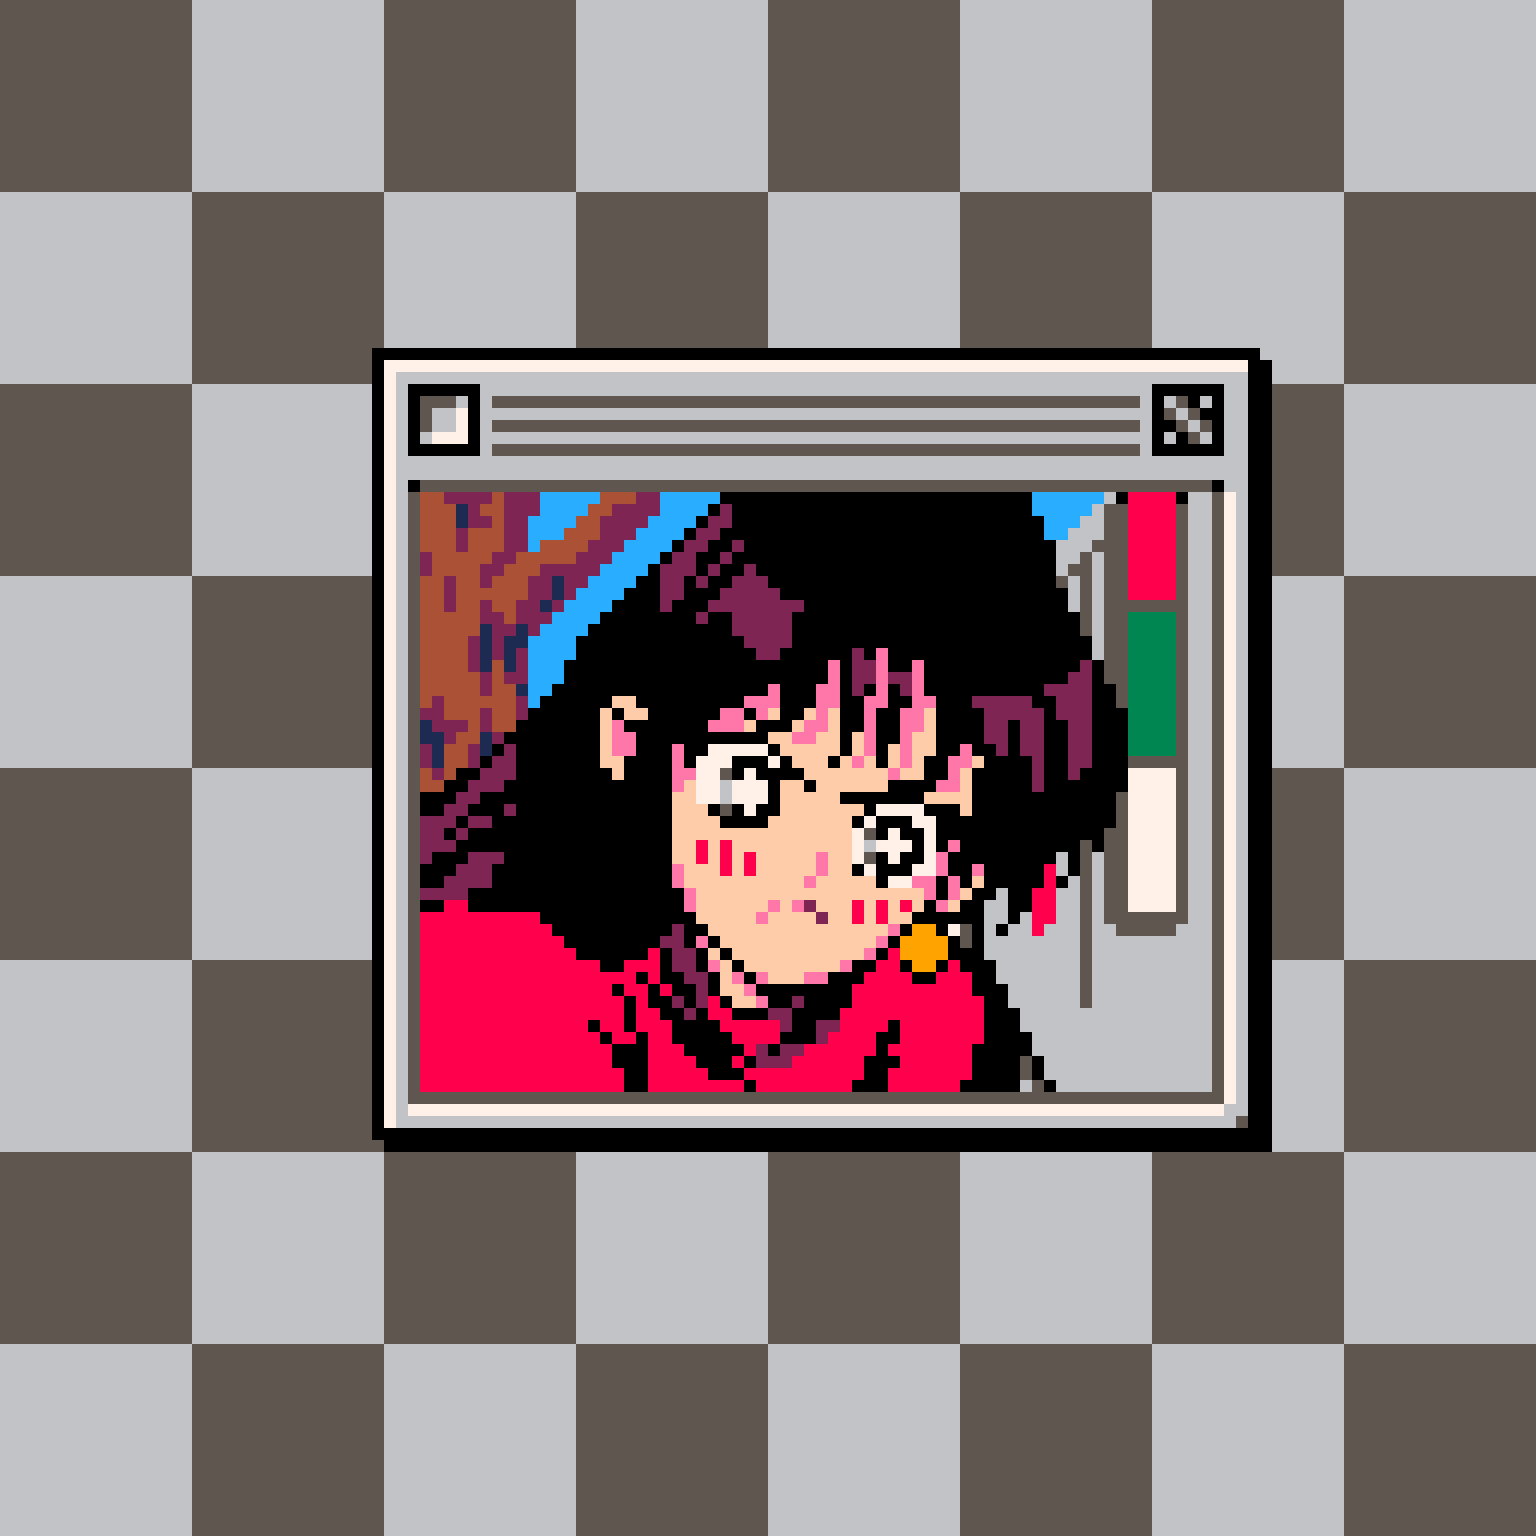 mars panel redraw in pico-8 palette